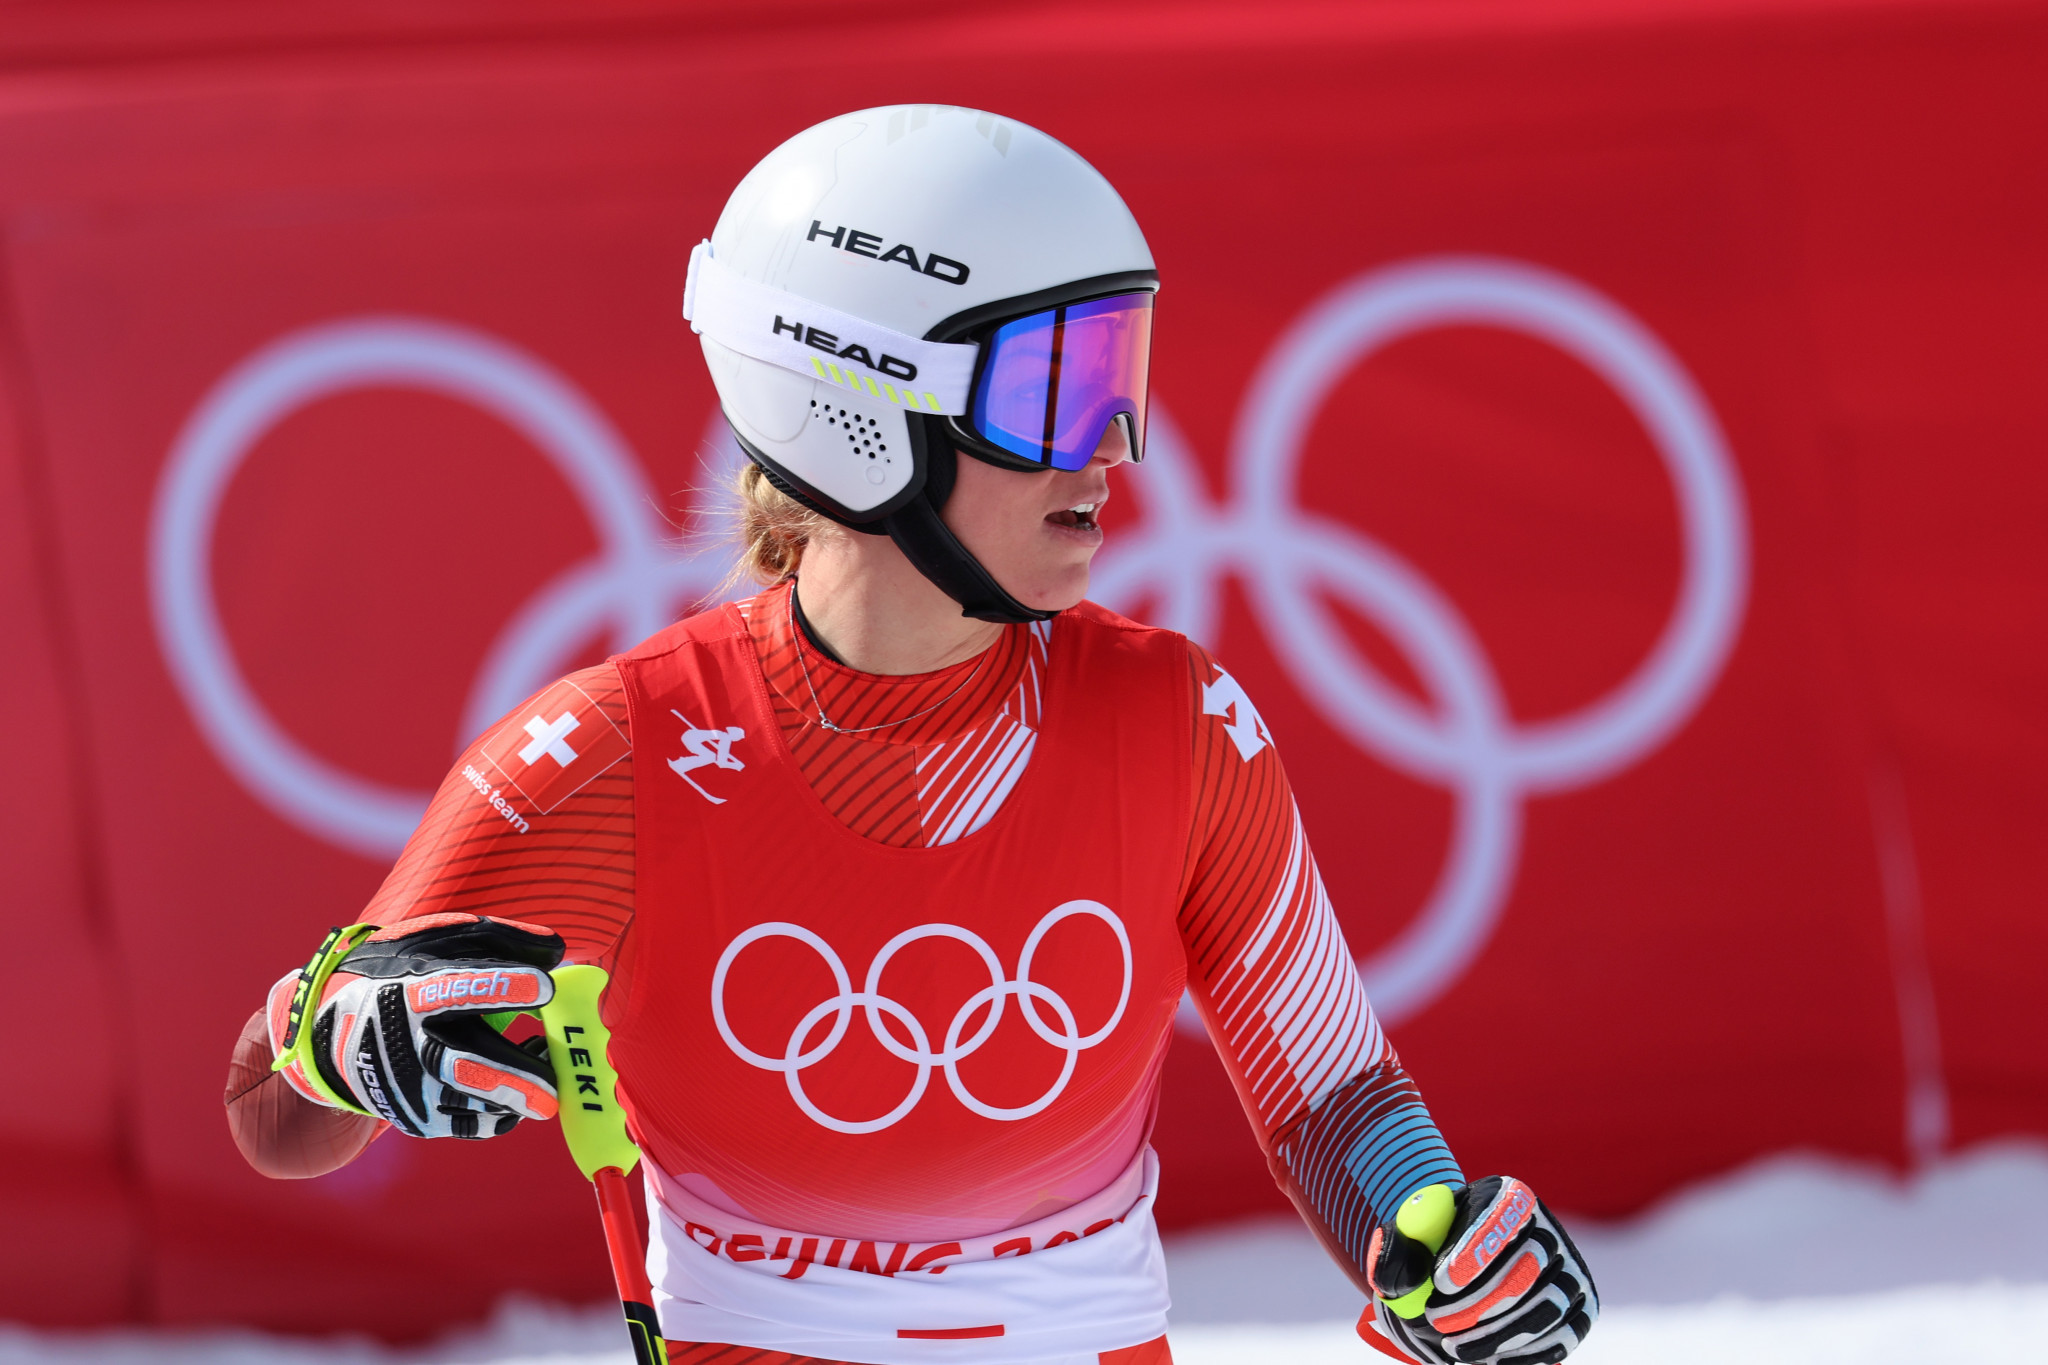 Lara Gut-Behrami of Switzerland won her first Olympic gold medal with victory in the women's Super-G event ©Getty Images